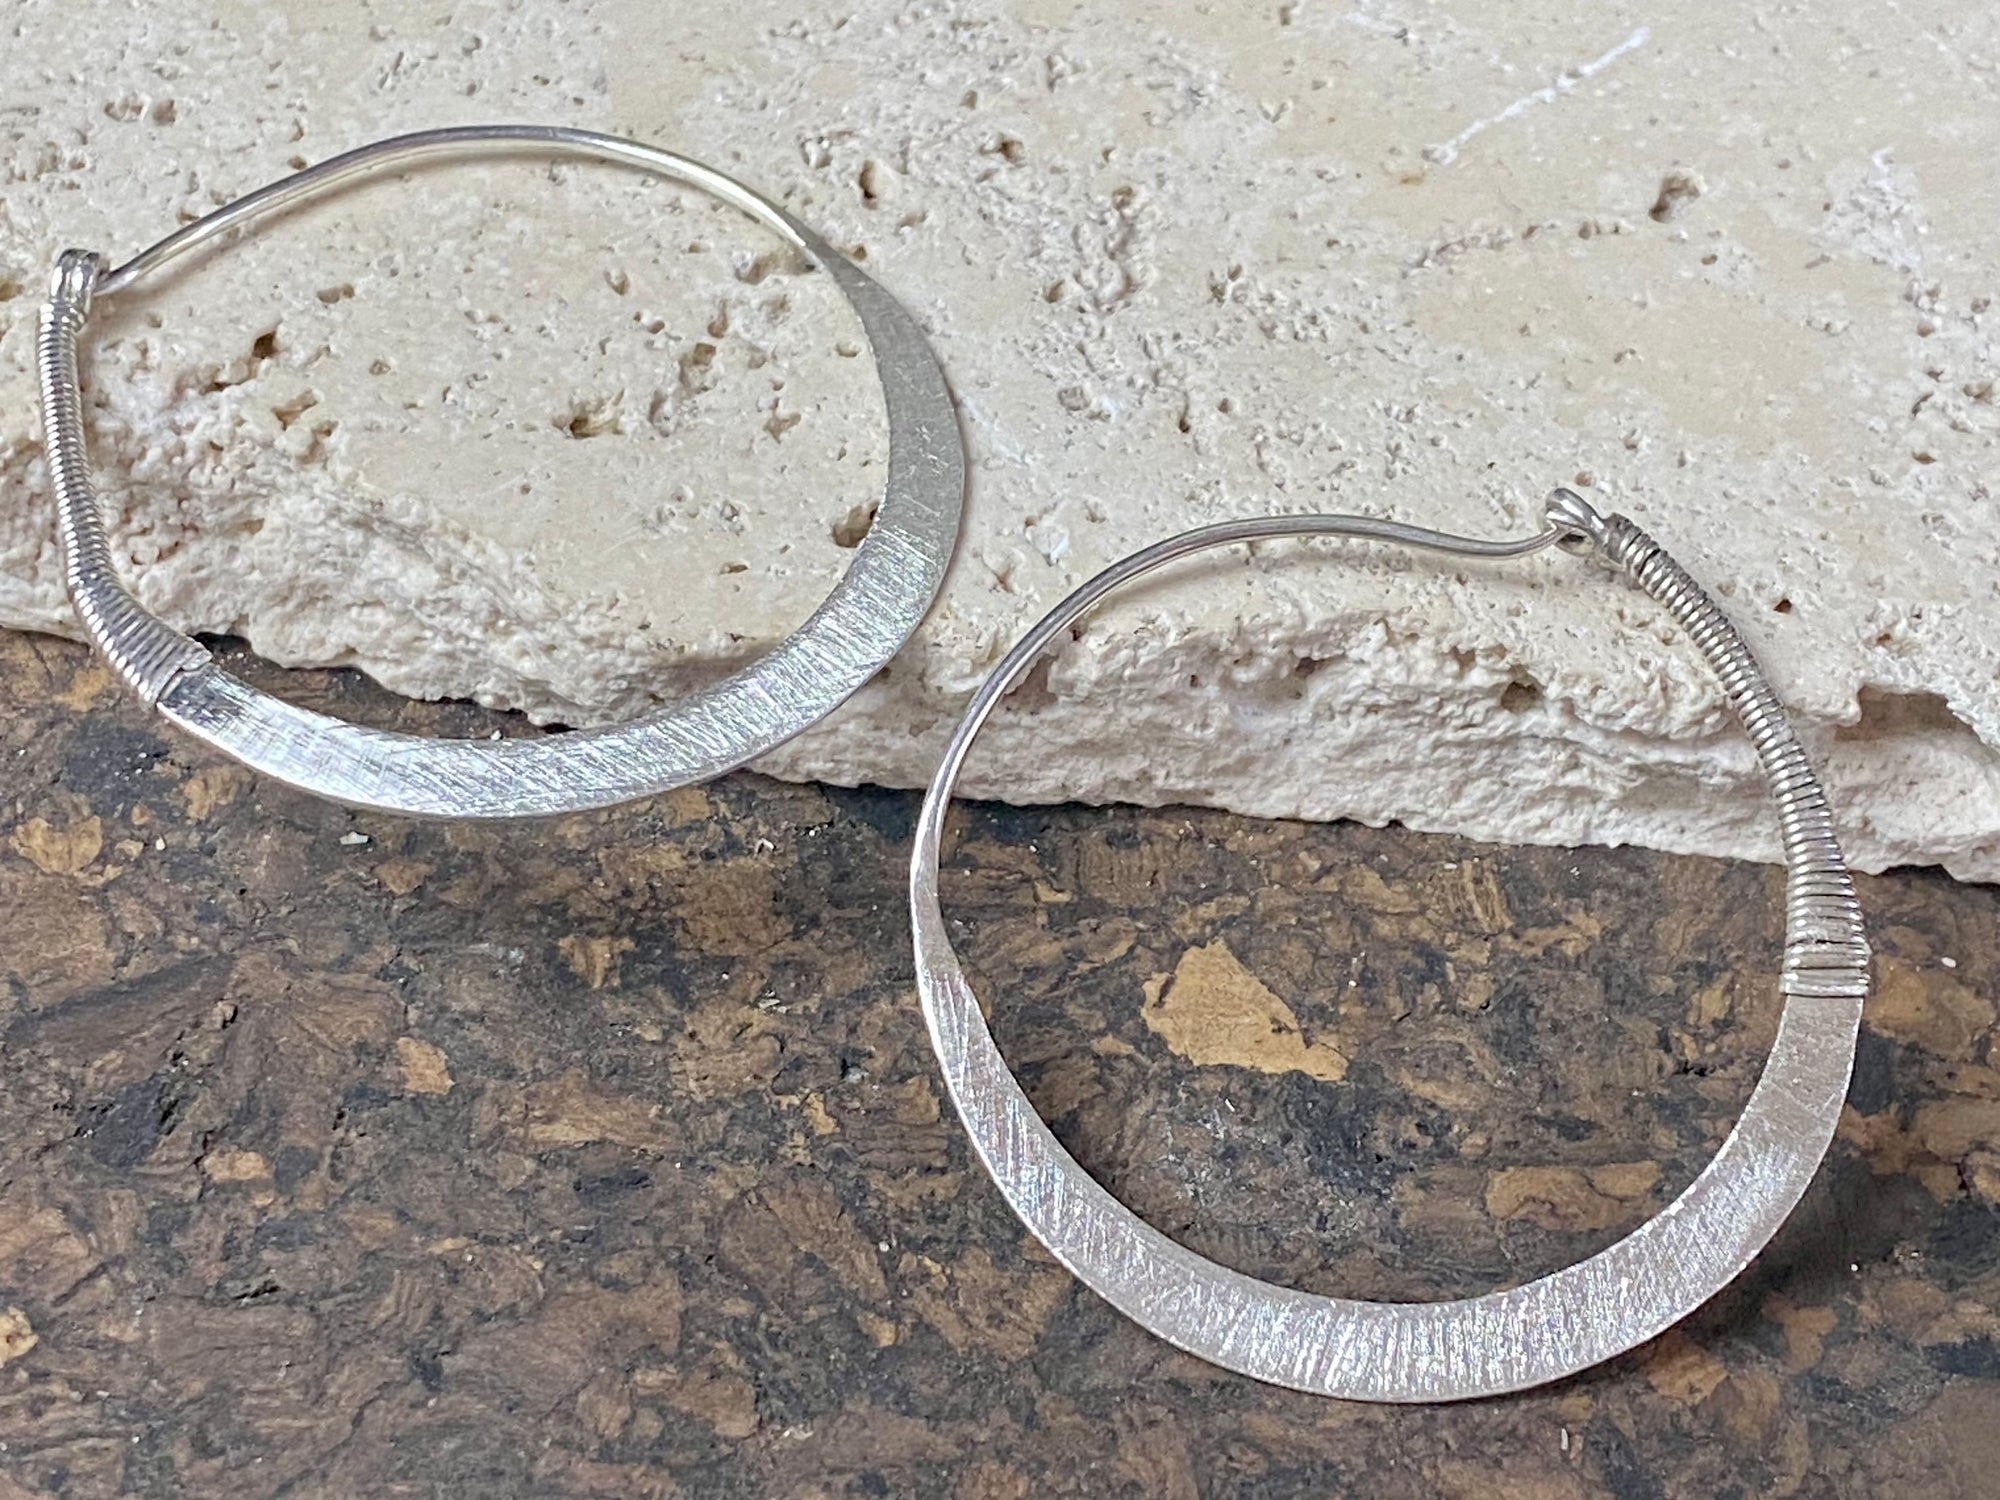 Hand made tribal sterling silver hoop earrings with wrapped silver wire detailing. 4.5 cm diameter